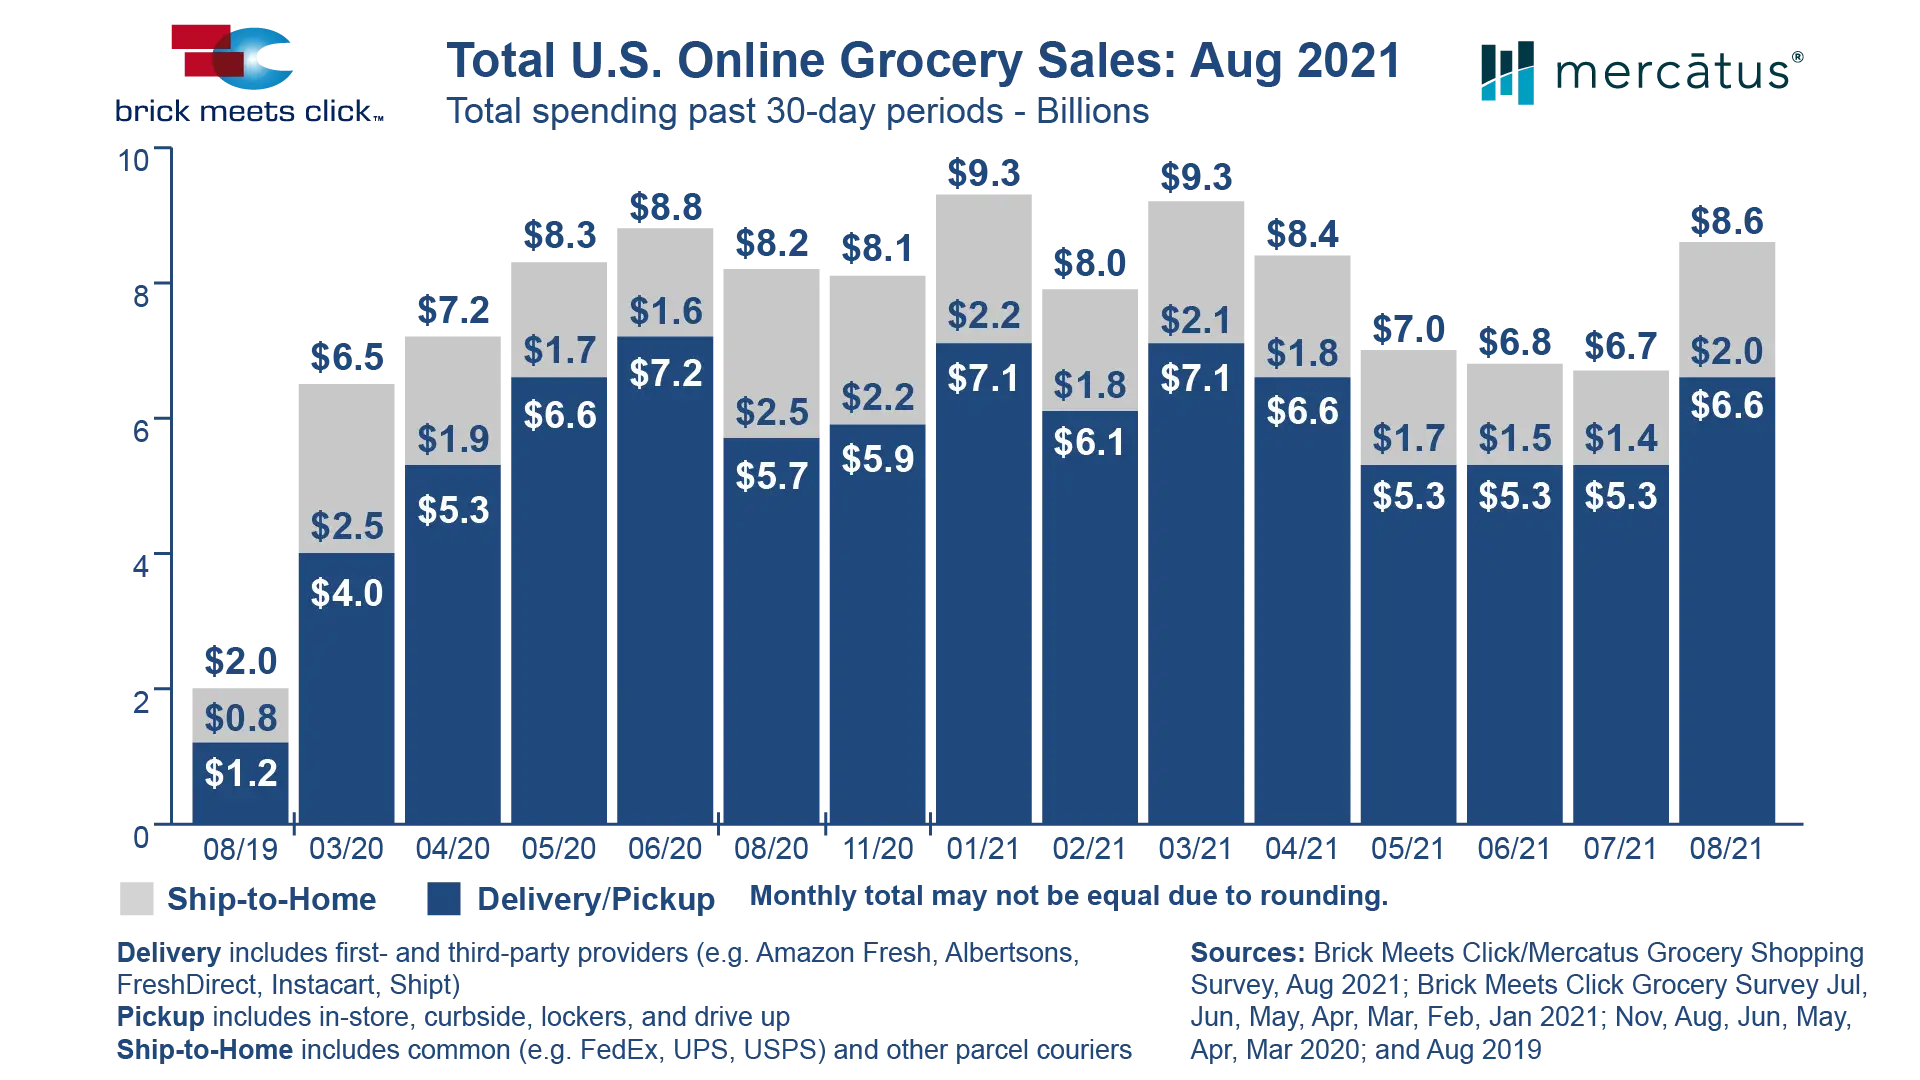 Grocery Sales Grow to $8.6 Billion in August 2021